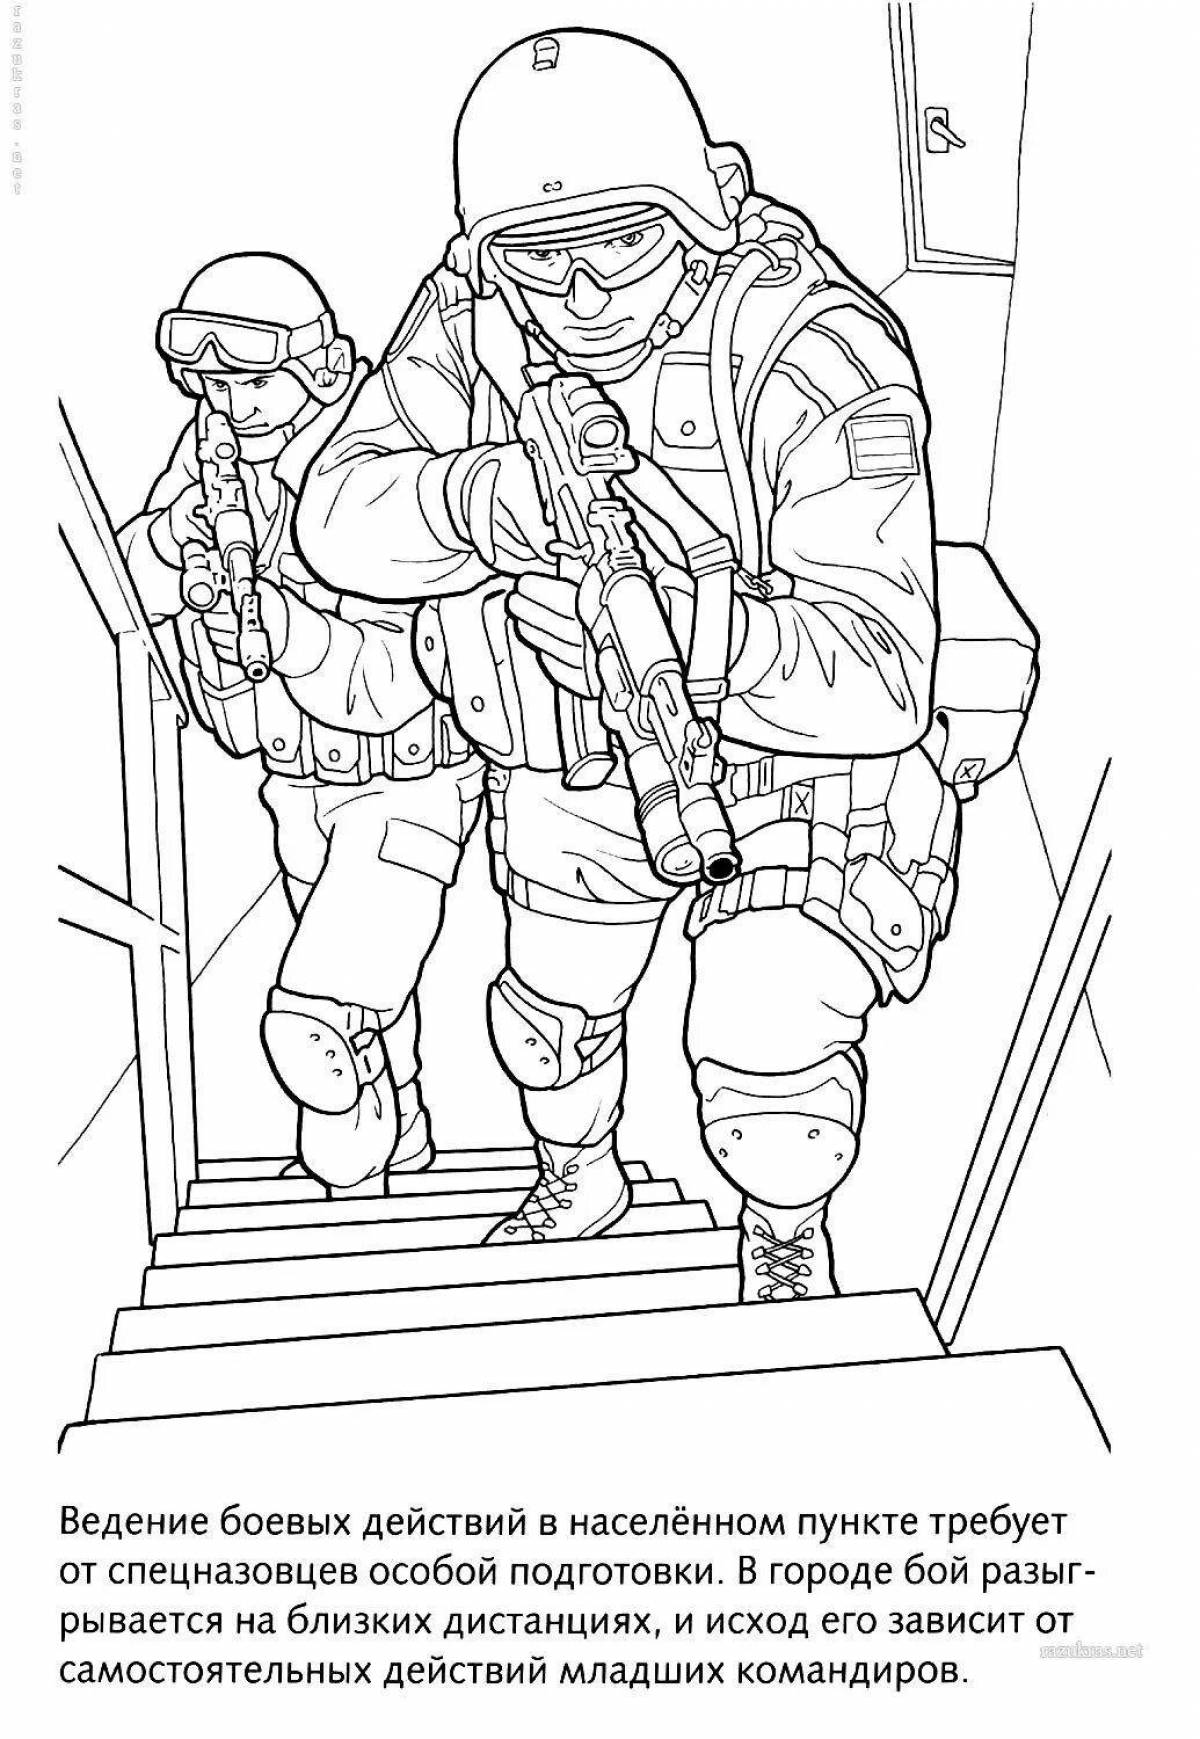 Fearless army special forces coloring page